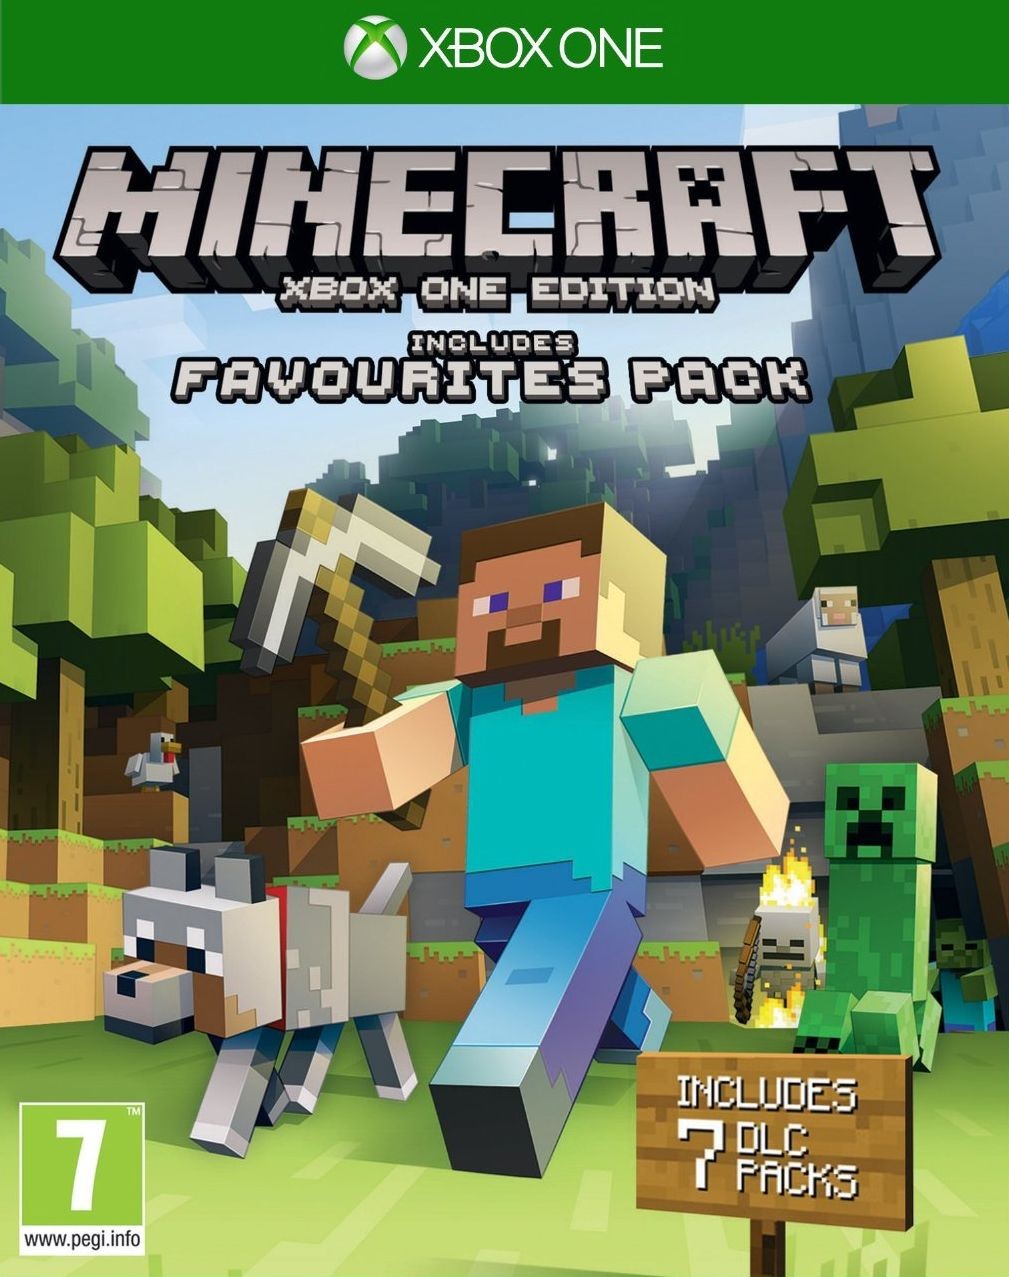 Minecraft Xbox One Edition Includes Favorites Pack